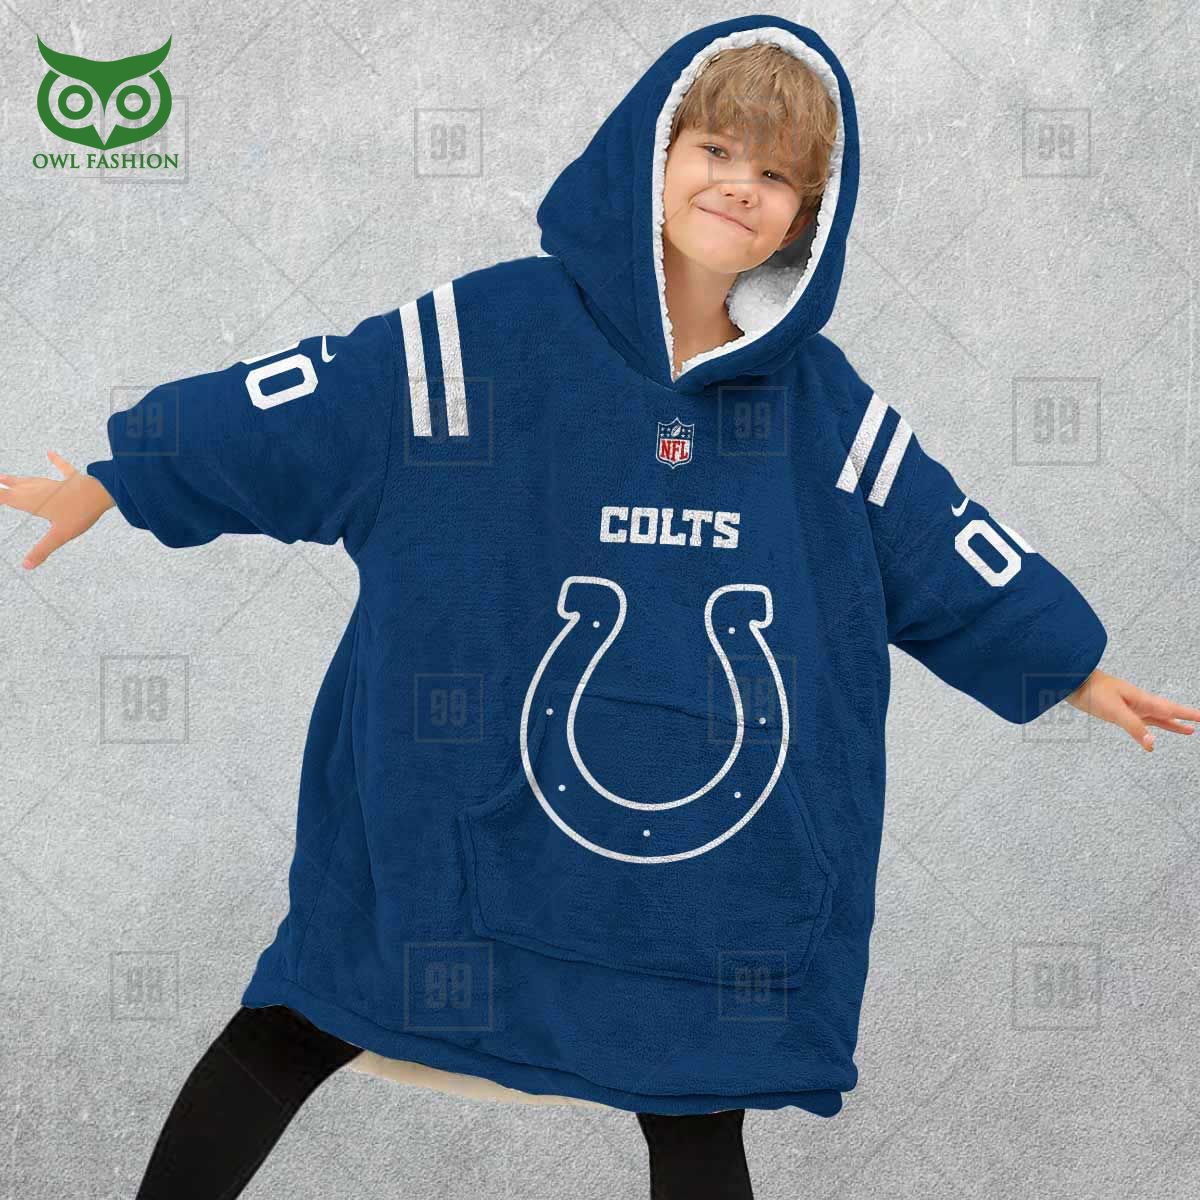 indianapolis colts american league nfl customized snuggie hoodie 4 PaKNZ